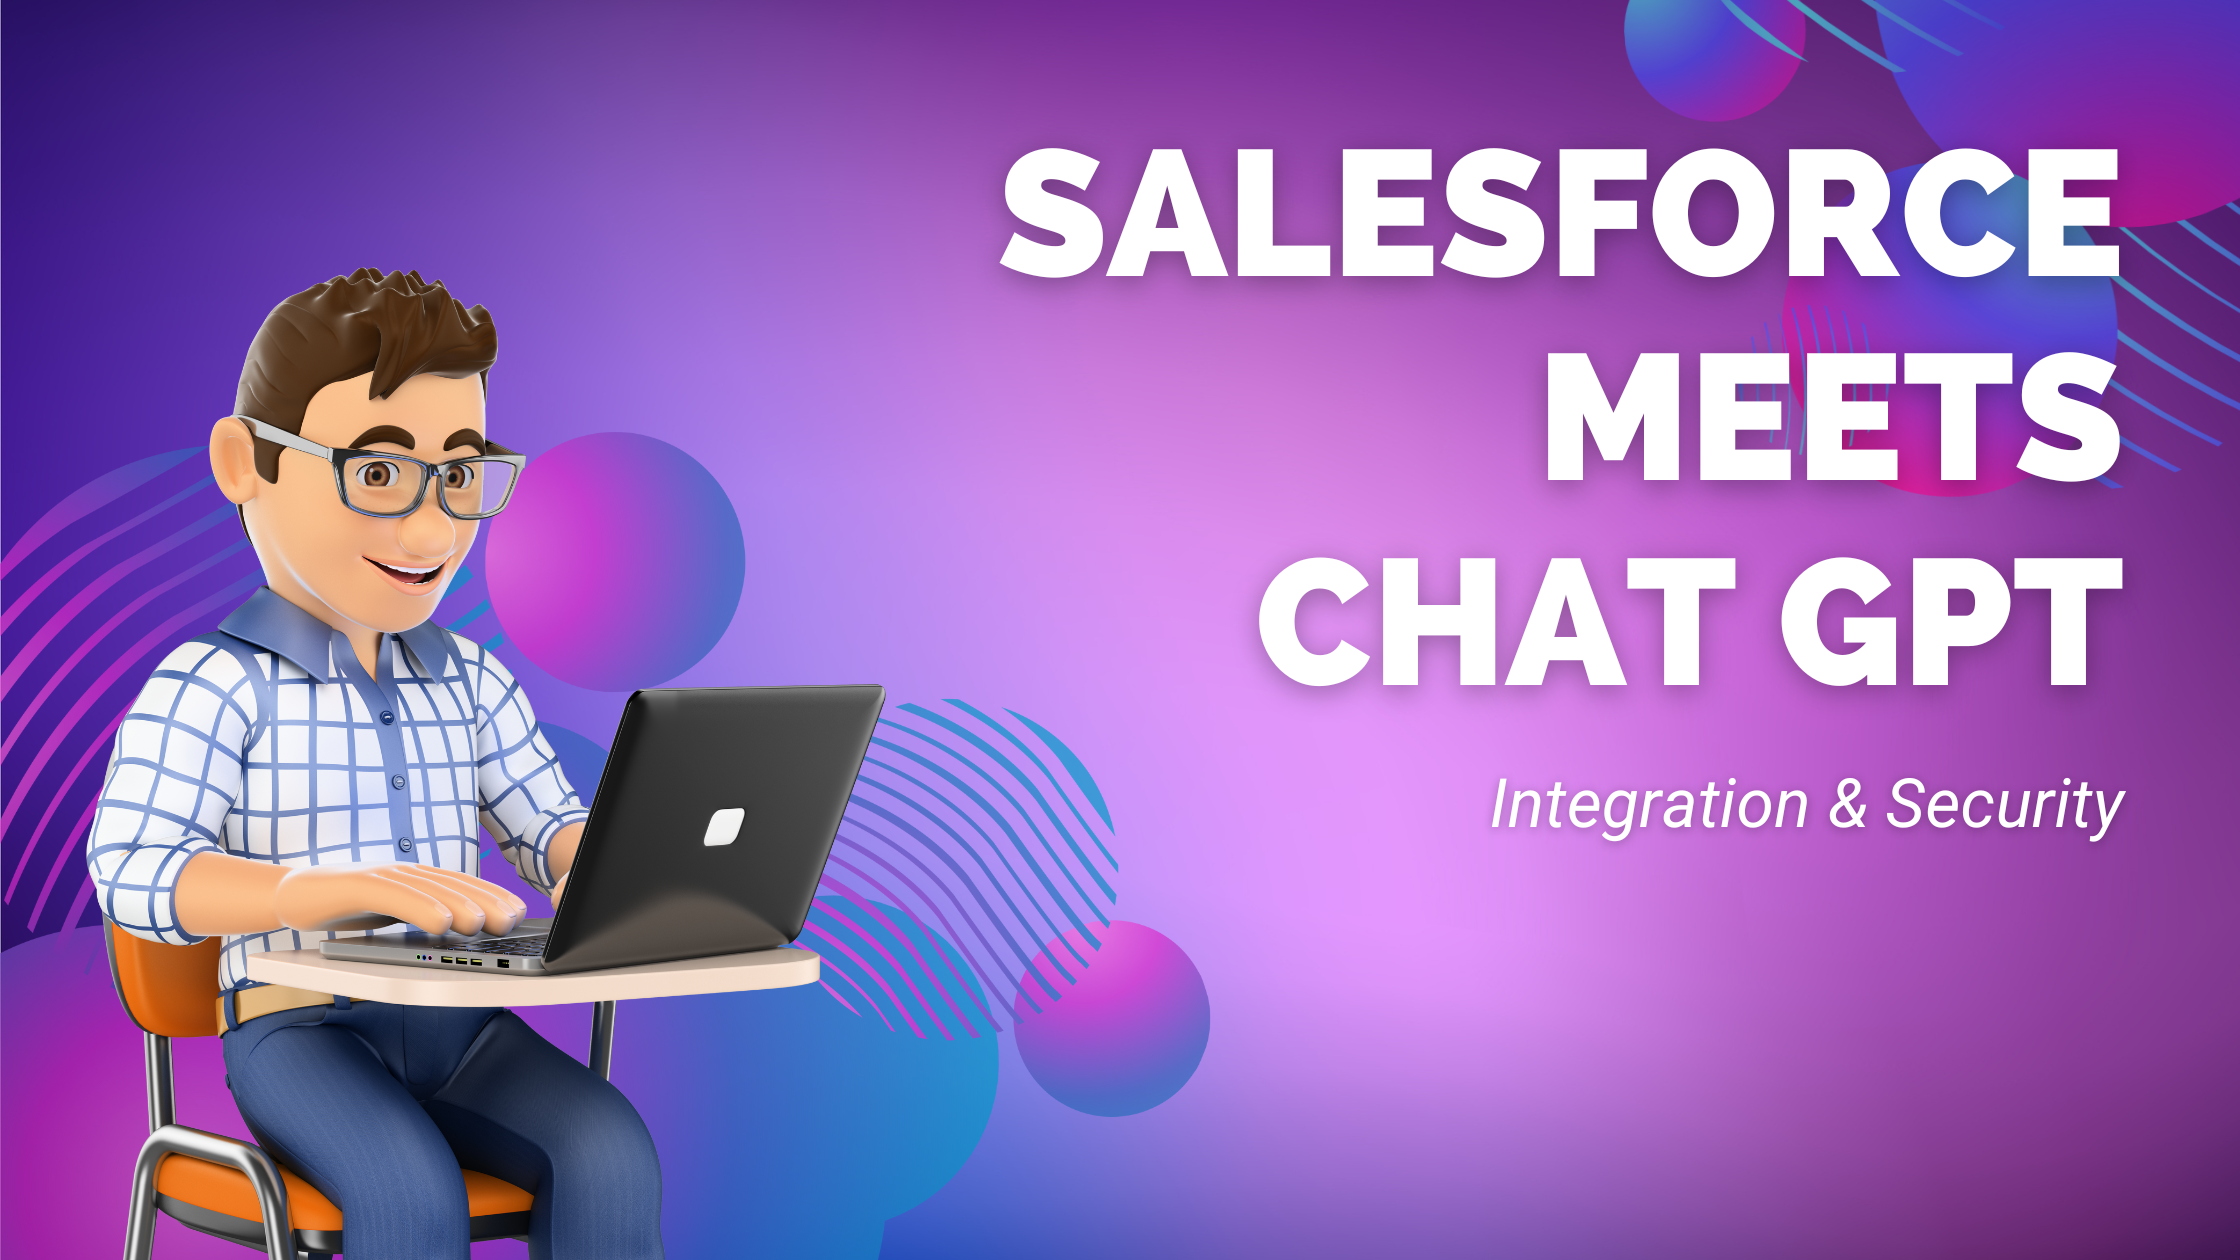 Salesforce integration with chatGPT